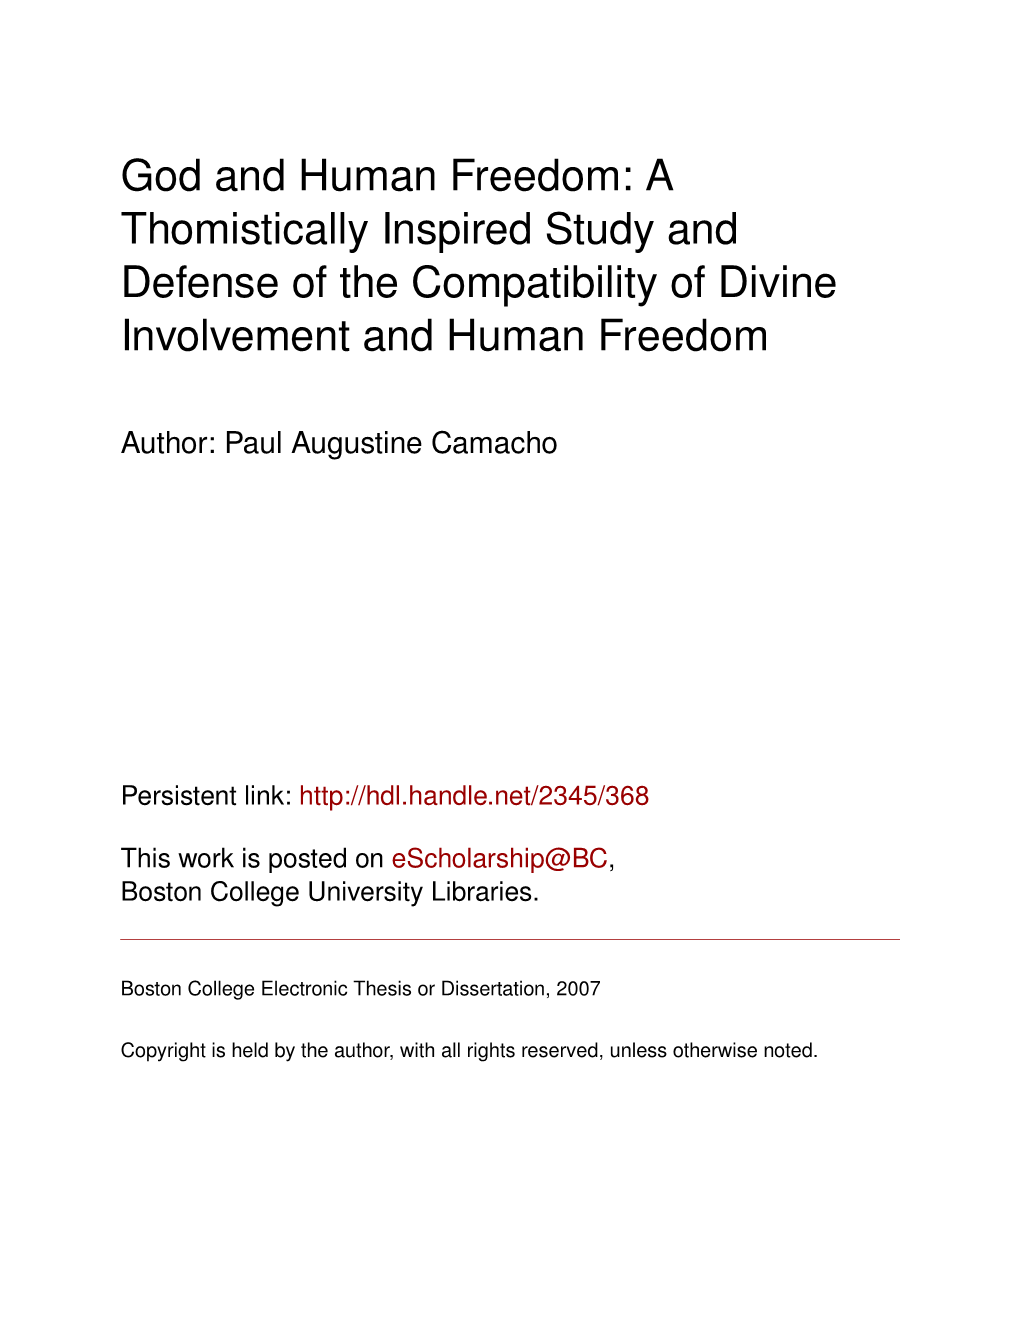 God and Human Freedom: a Thomistically Inspired Study and Defense of the Compatibility of Divine Involvement and Human Freedom